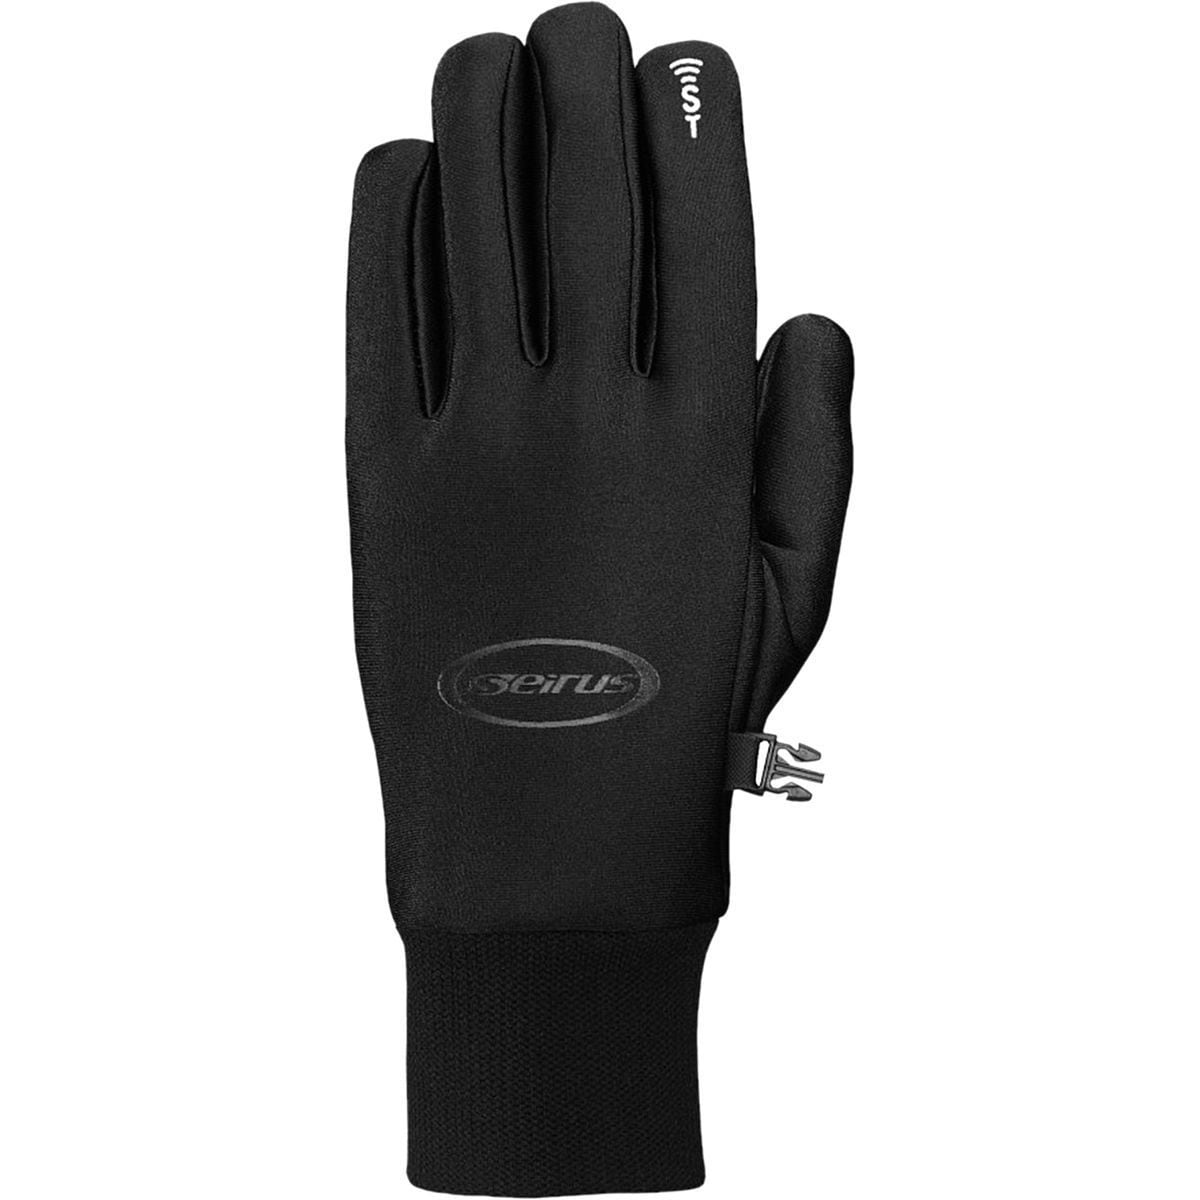 Seirus SoundTouch All Weather Glove - Women's Black, L